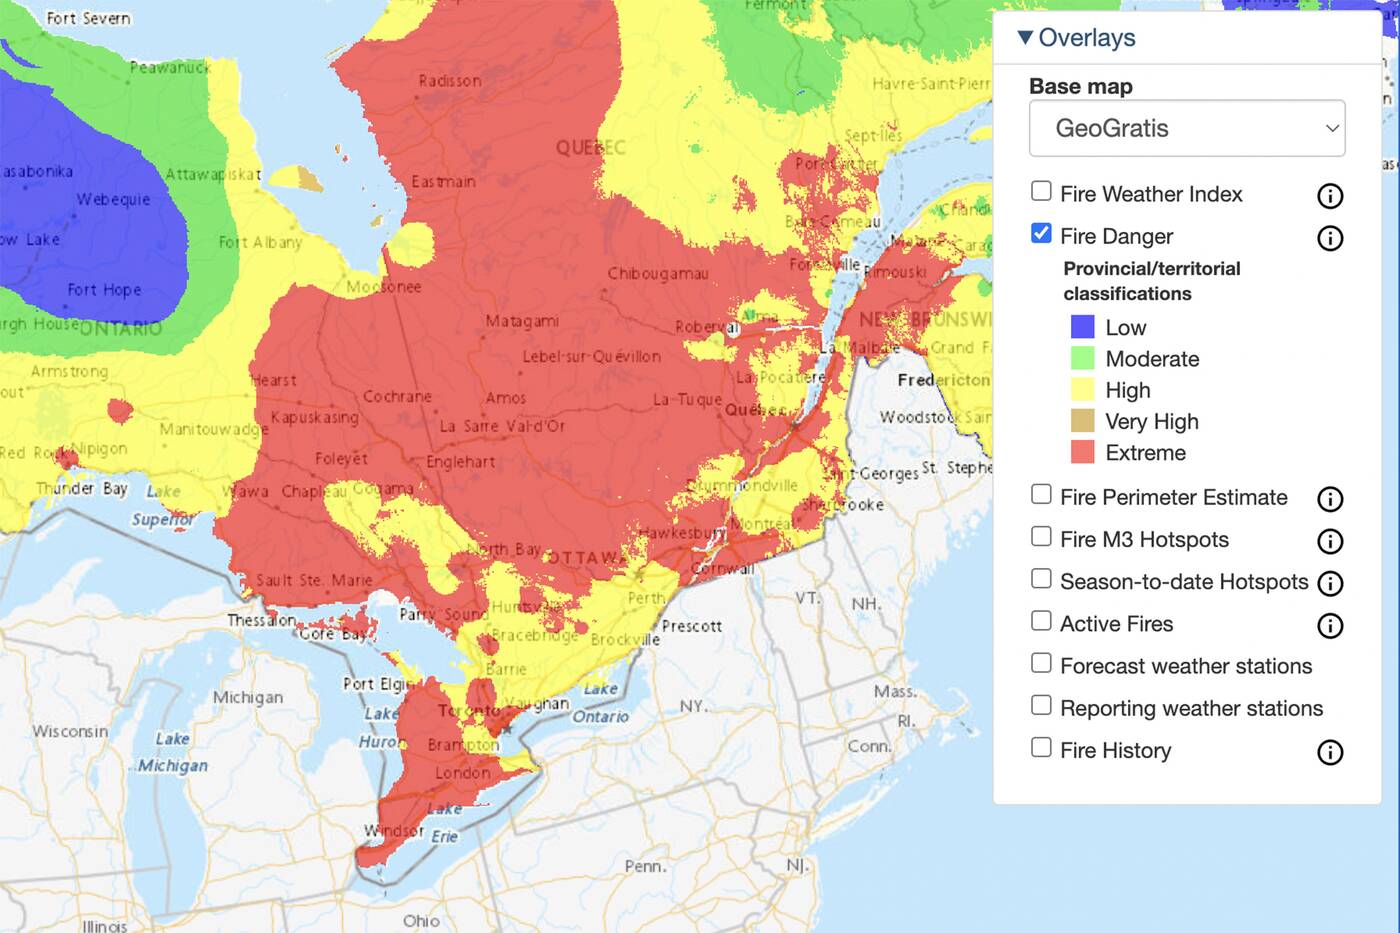 The risk of forest fires in Toronto is currently considered extreme